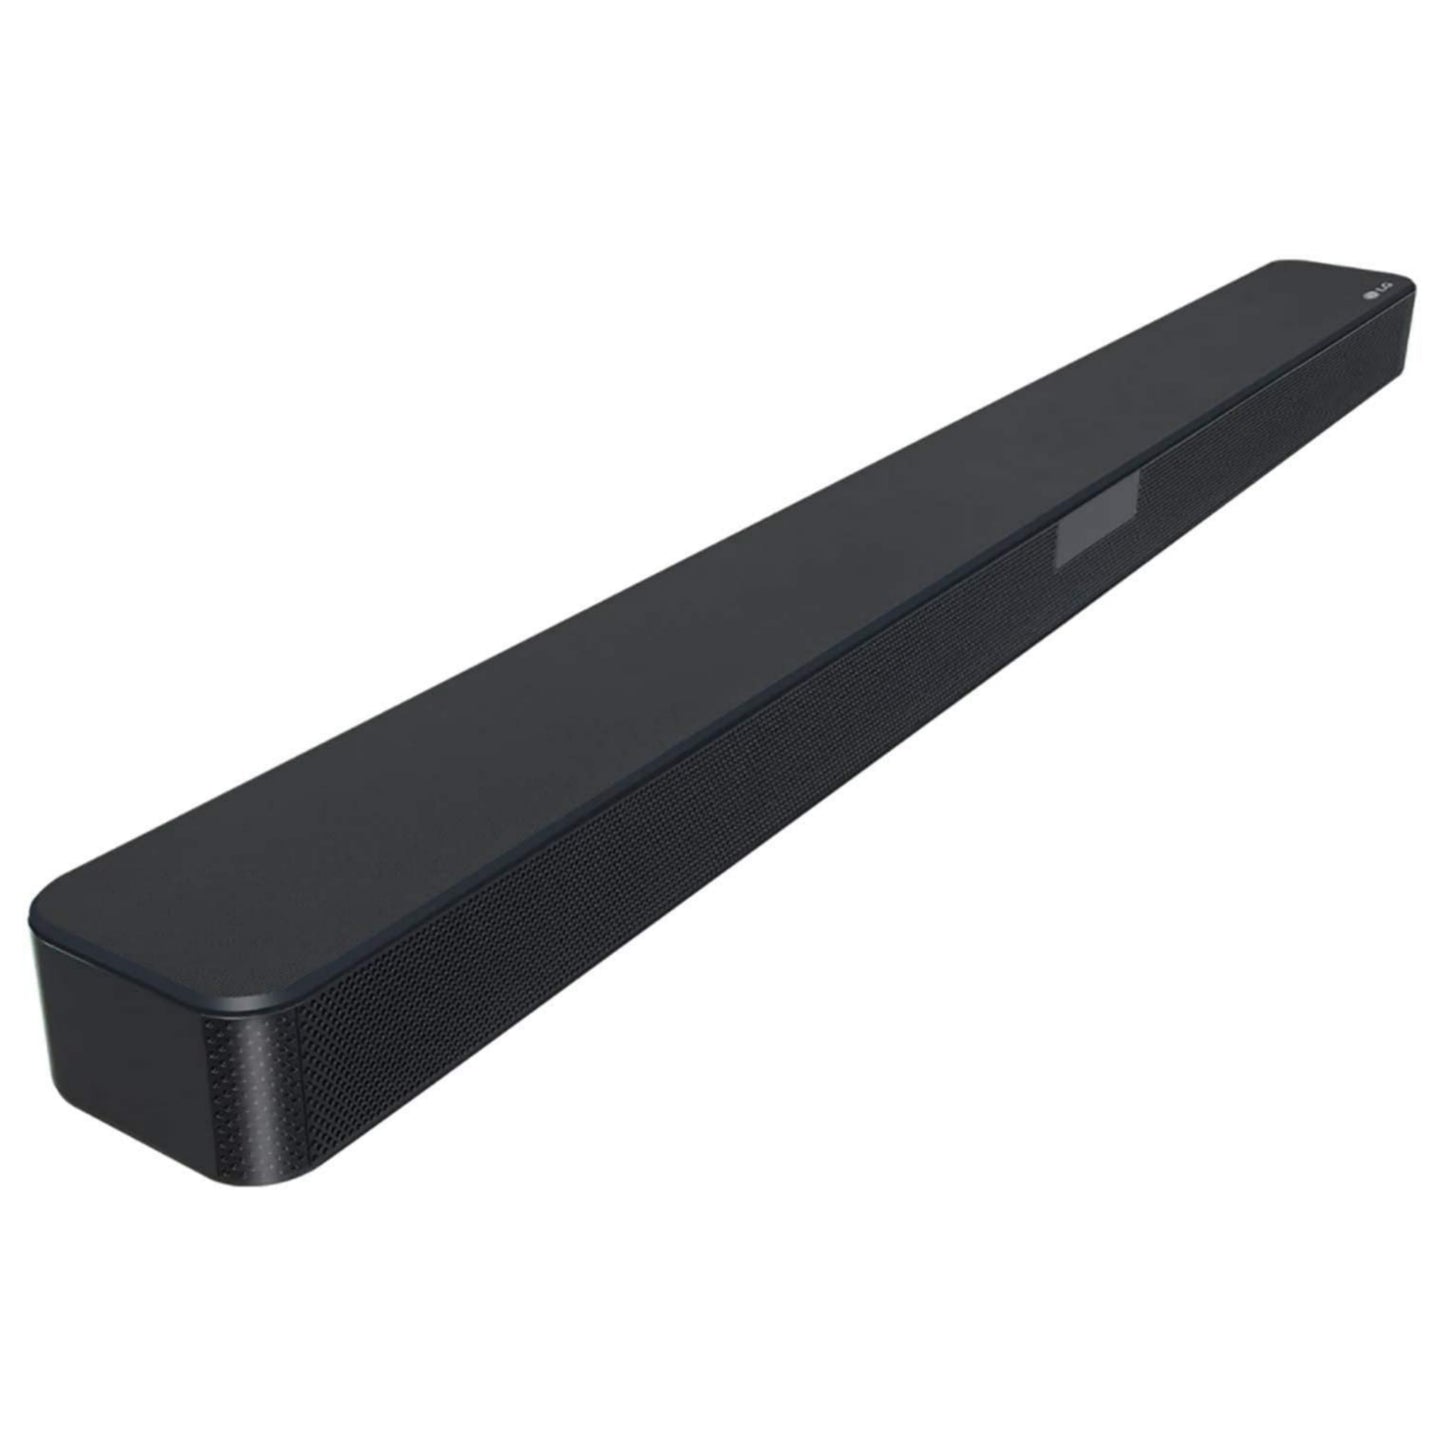 LG SN4 2.1Ch High Resolution Sound Bar 300Watts with Wireless Subwoofer + HDMI Out - Brand New